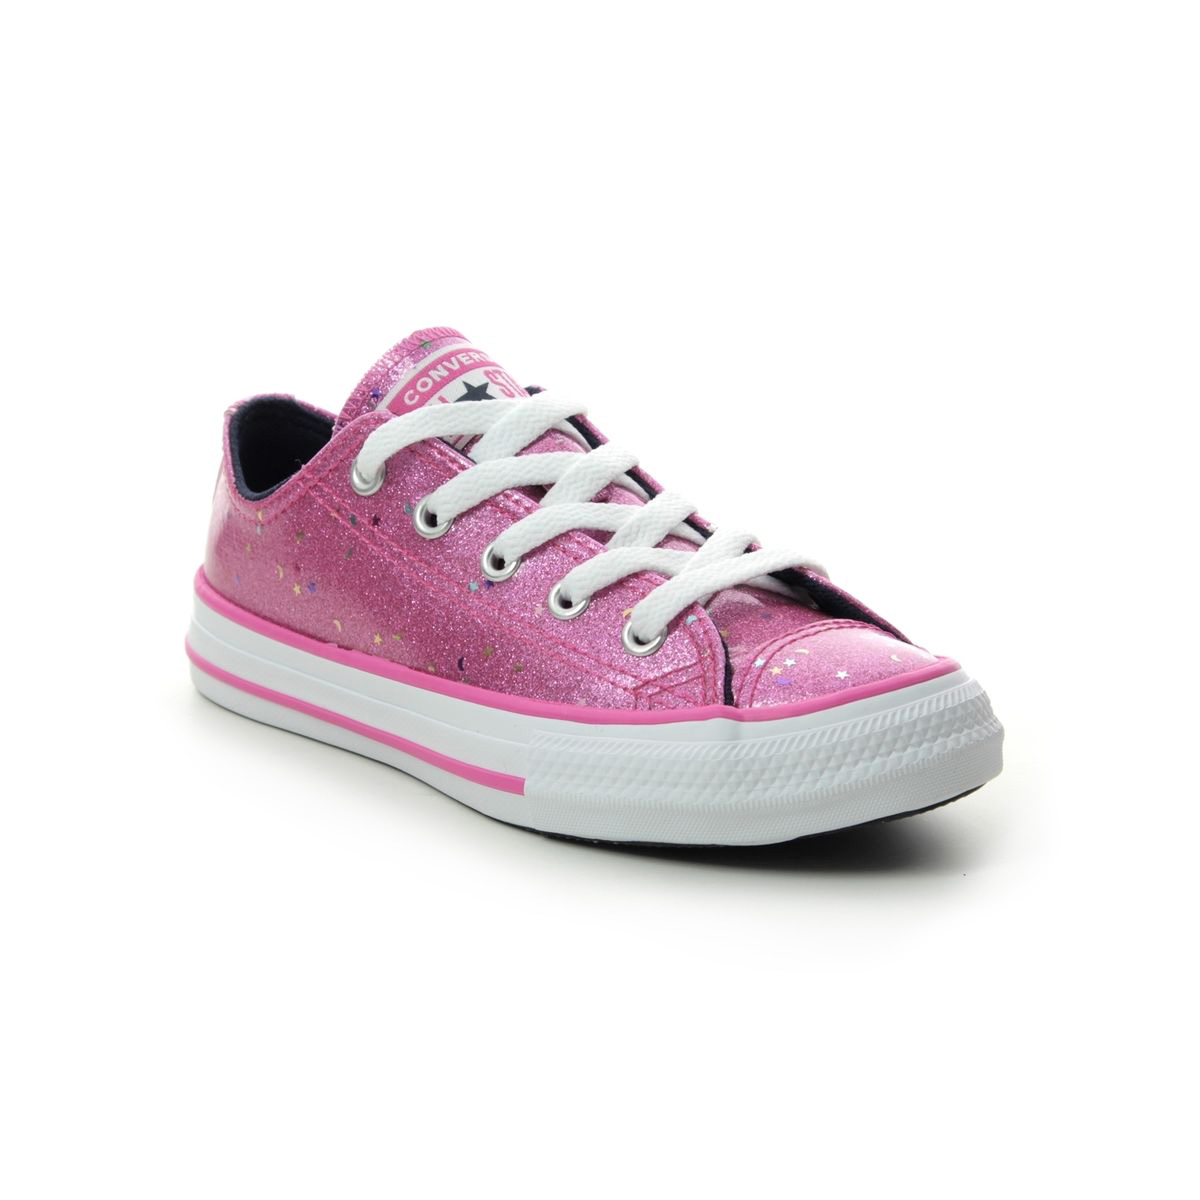 pink converse sparkly